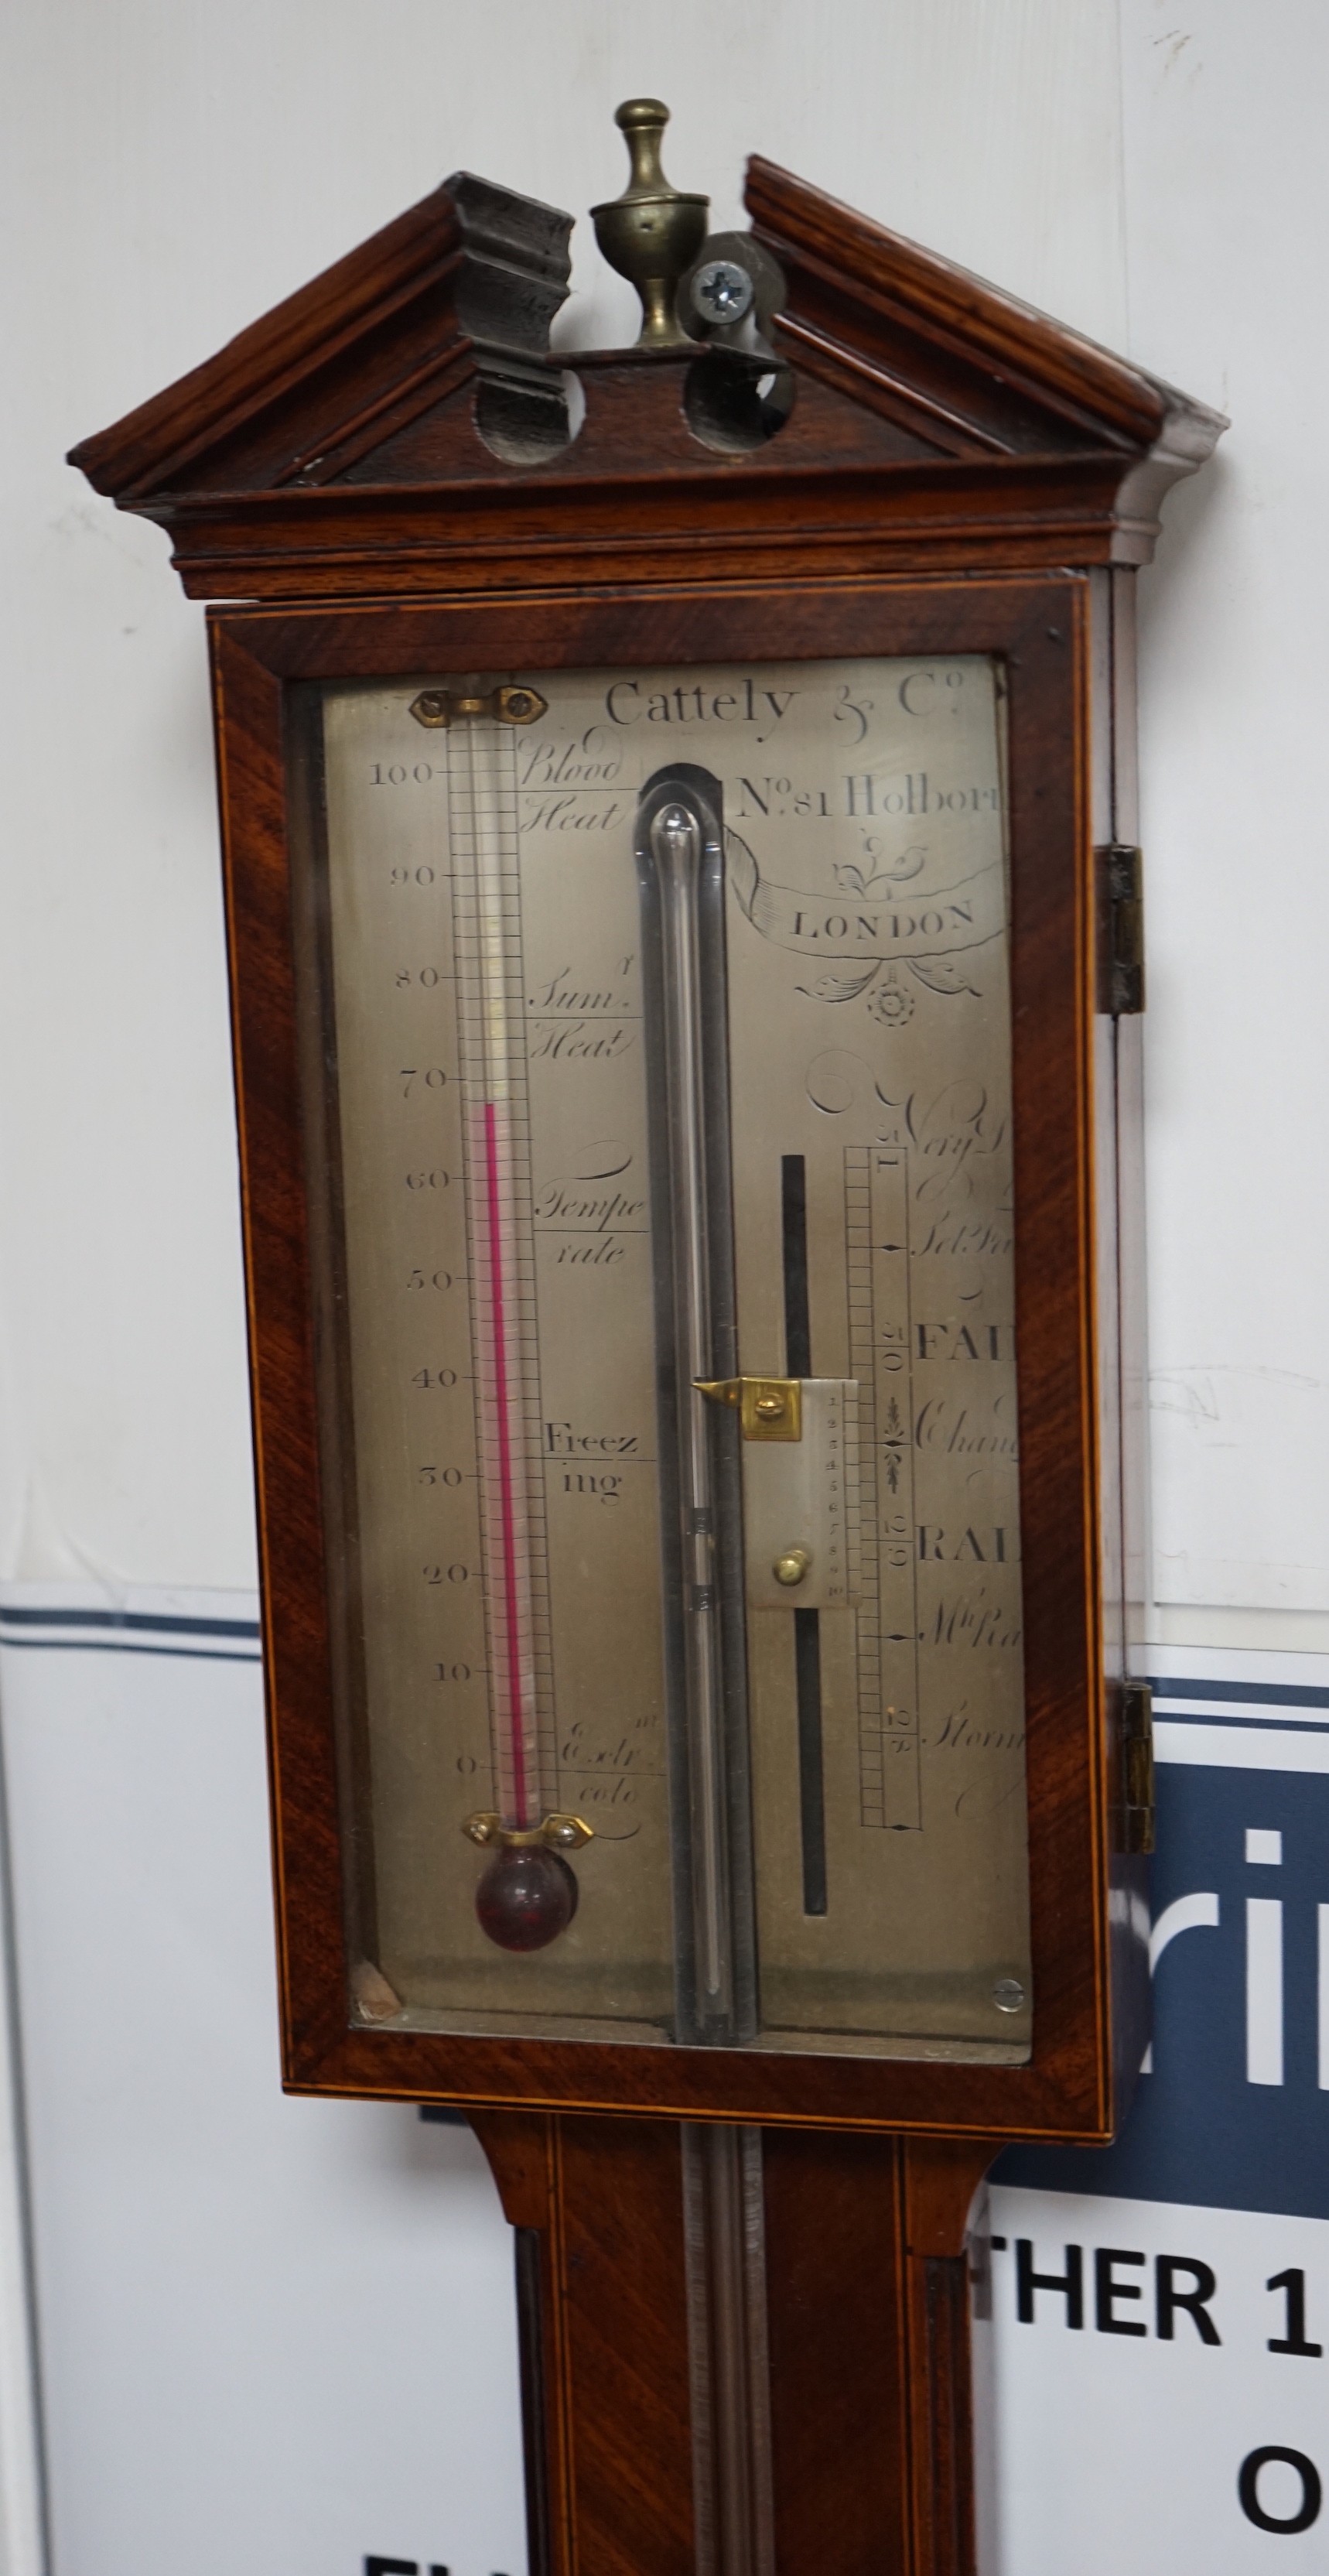 Cattely & Co, Holborn, London. A George III feathered walnut stick barometer, height 98cms. Height 98 cm